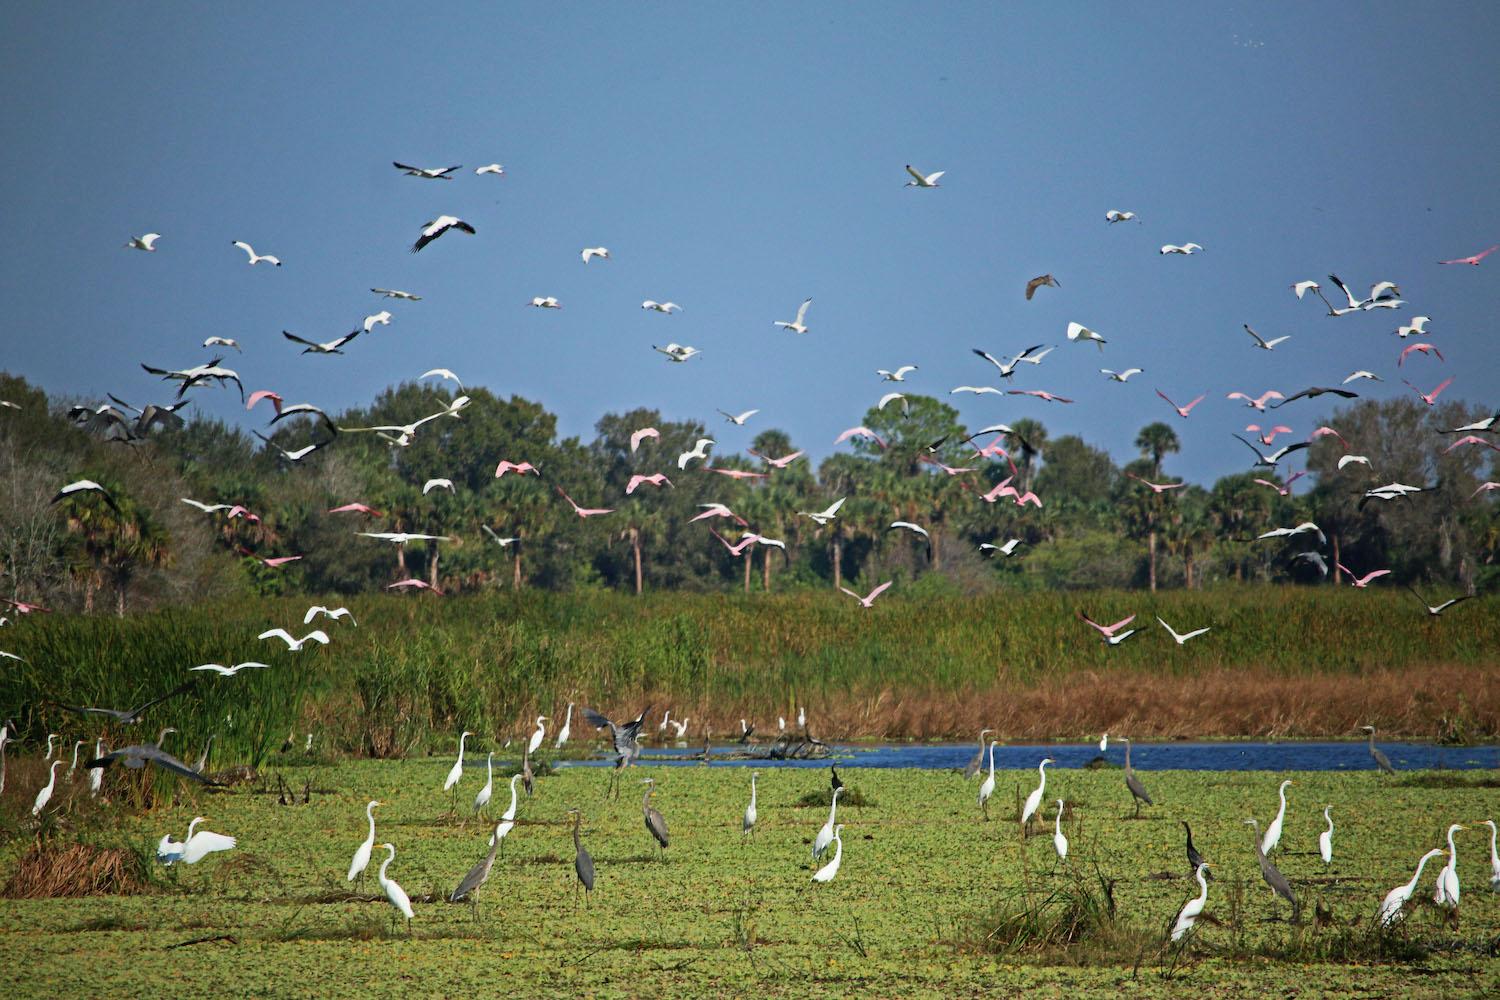 The 2021 nesting season for wading birds in Everglades National Park was one of the better ones in recent years, though not quite as good as the 2018 season/Erika Zambello, 2018 photo